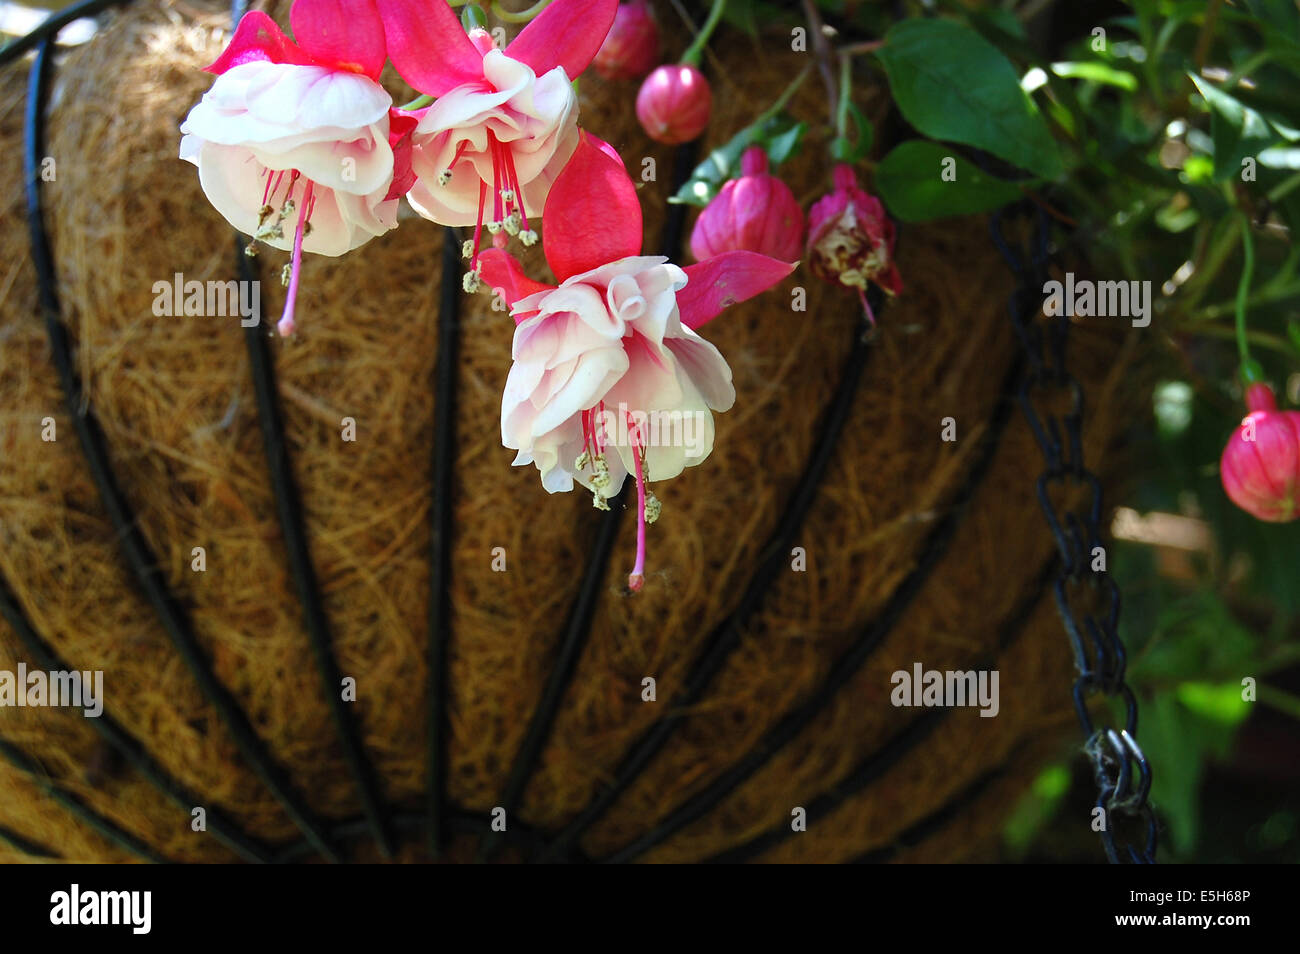 Fuchsia, known same as earring is permanent, perennial plant Stock Photo